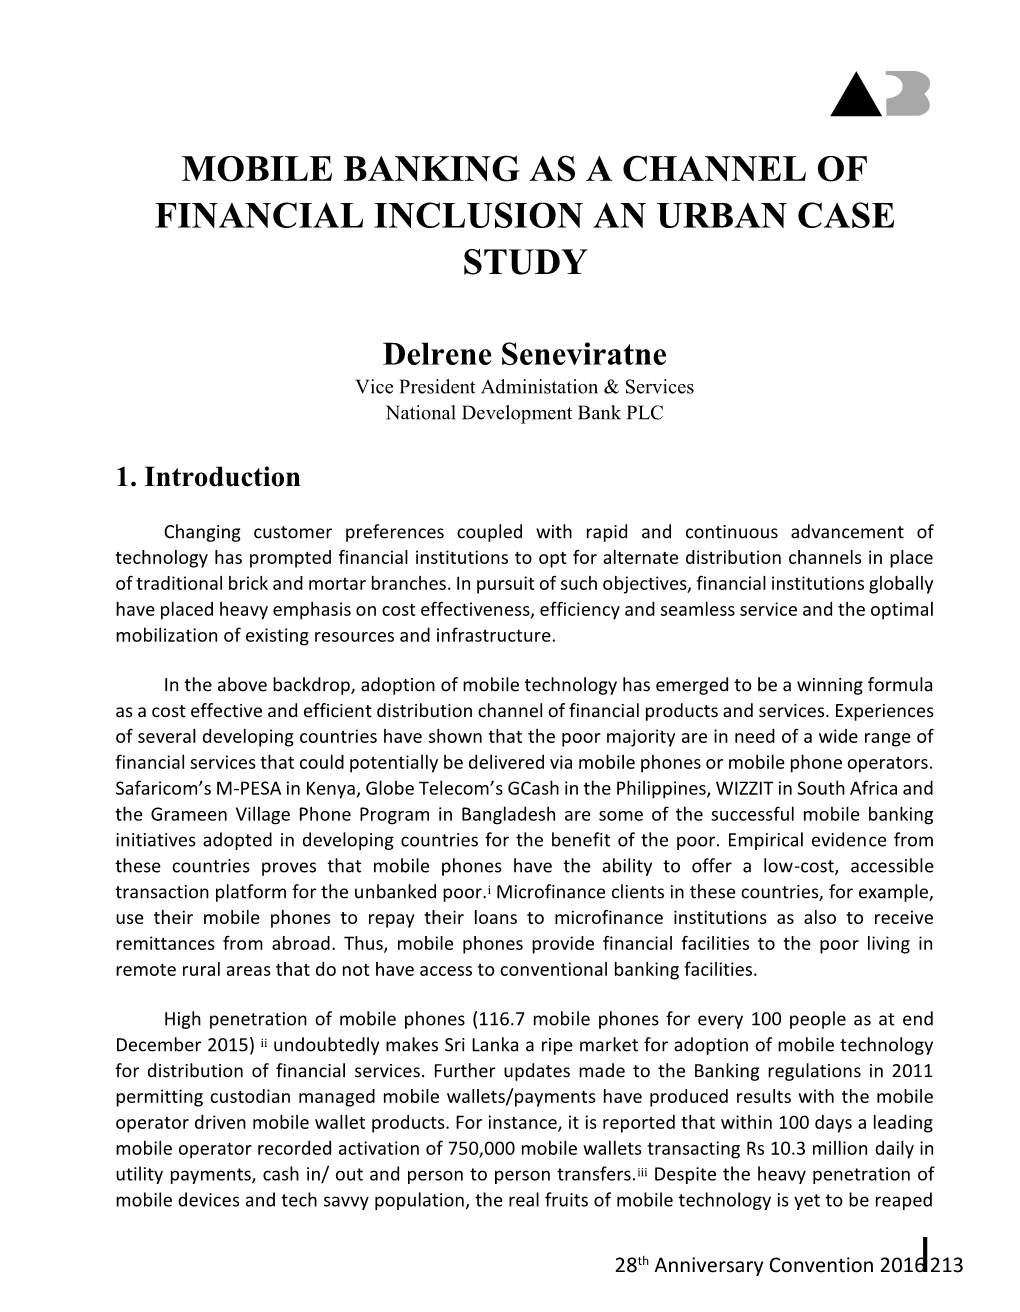 Mobile Banking As a Channel of Financial Inclusion an Urban Case Study